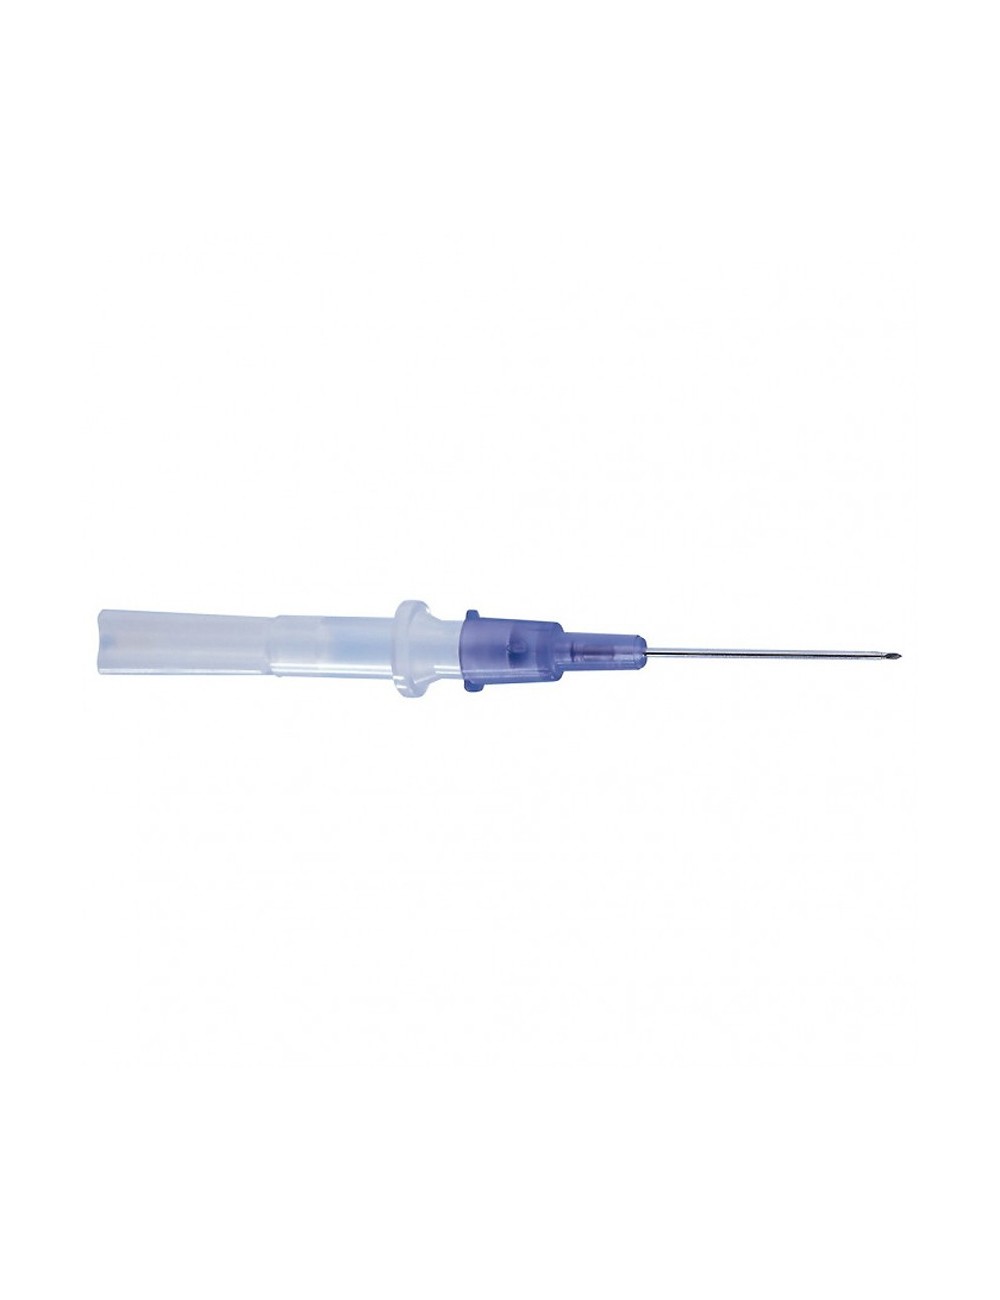 CATHETER COURT JELCO + SITE INJECTION G14 A G22 (X 50)